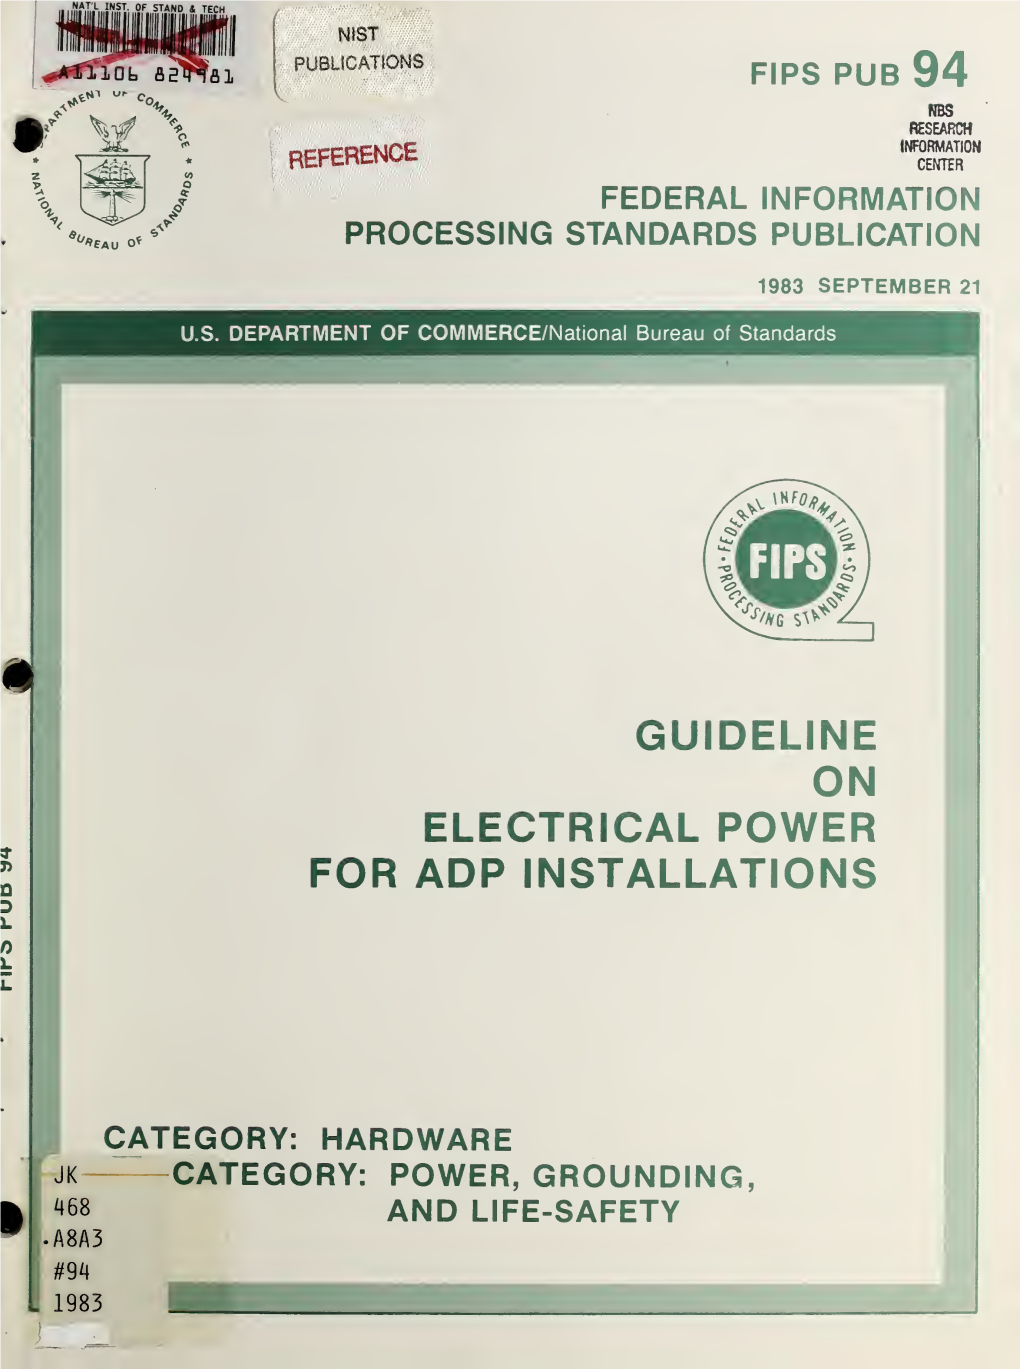 Guideline on Electrical Power for Adp Installations